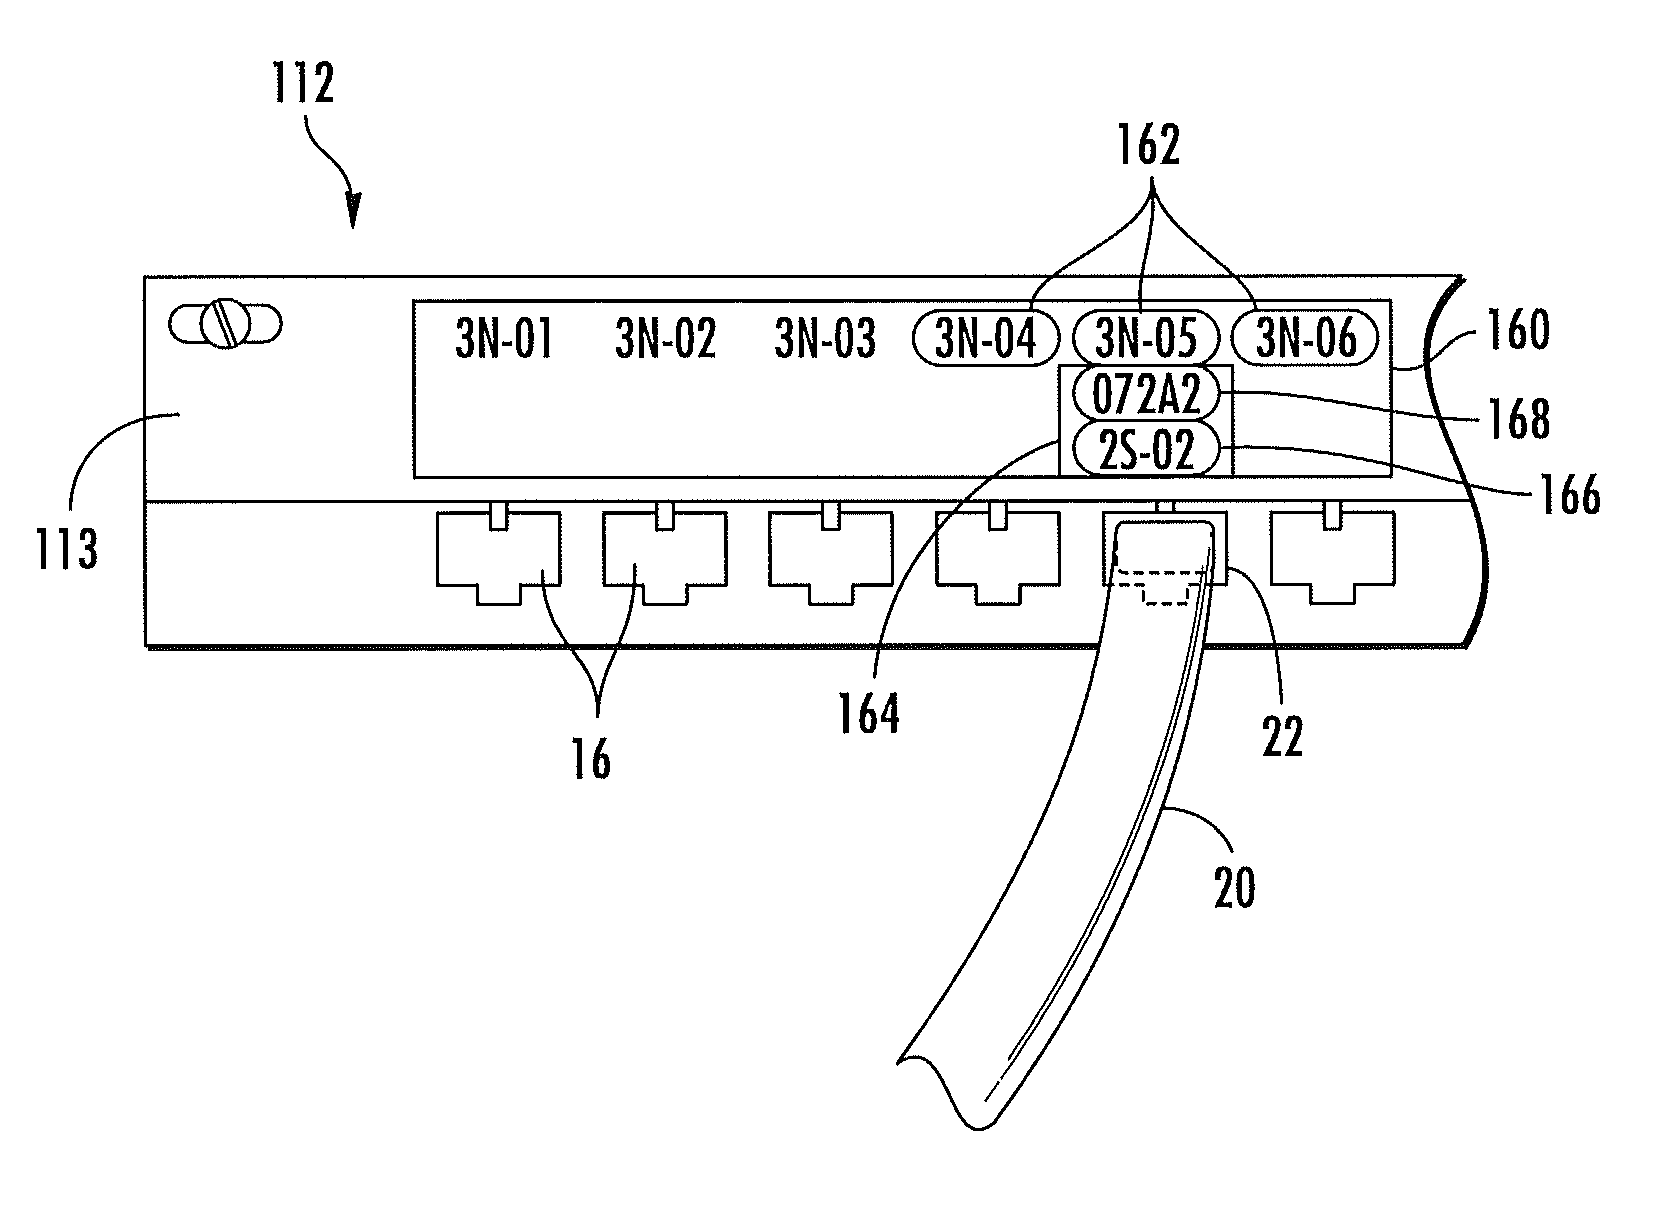 Dynamic labeling of patch panel ports